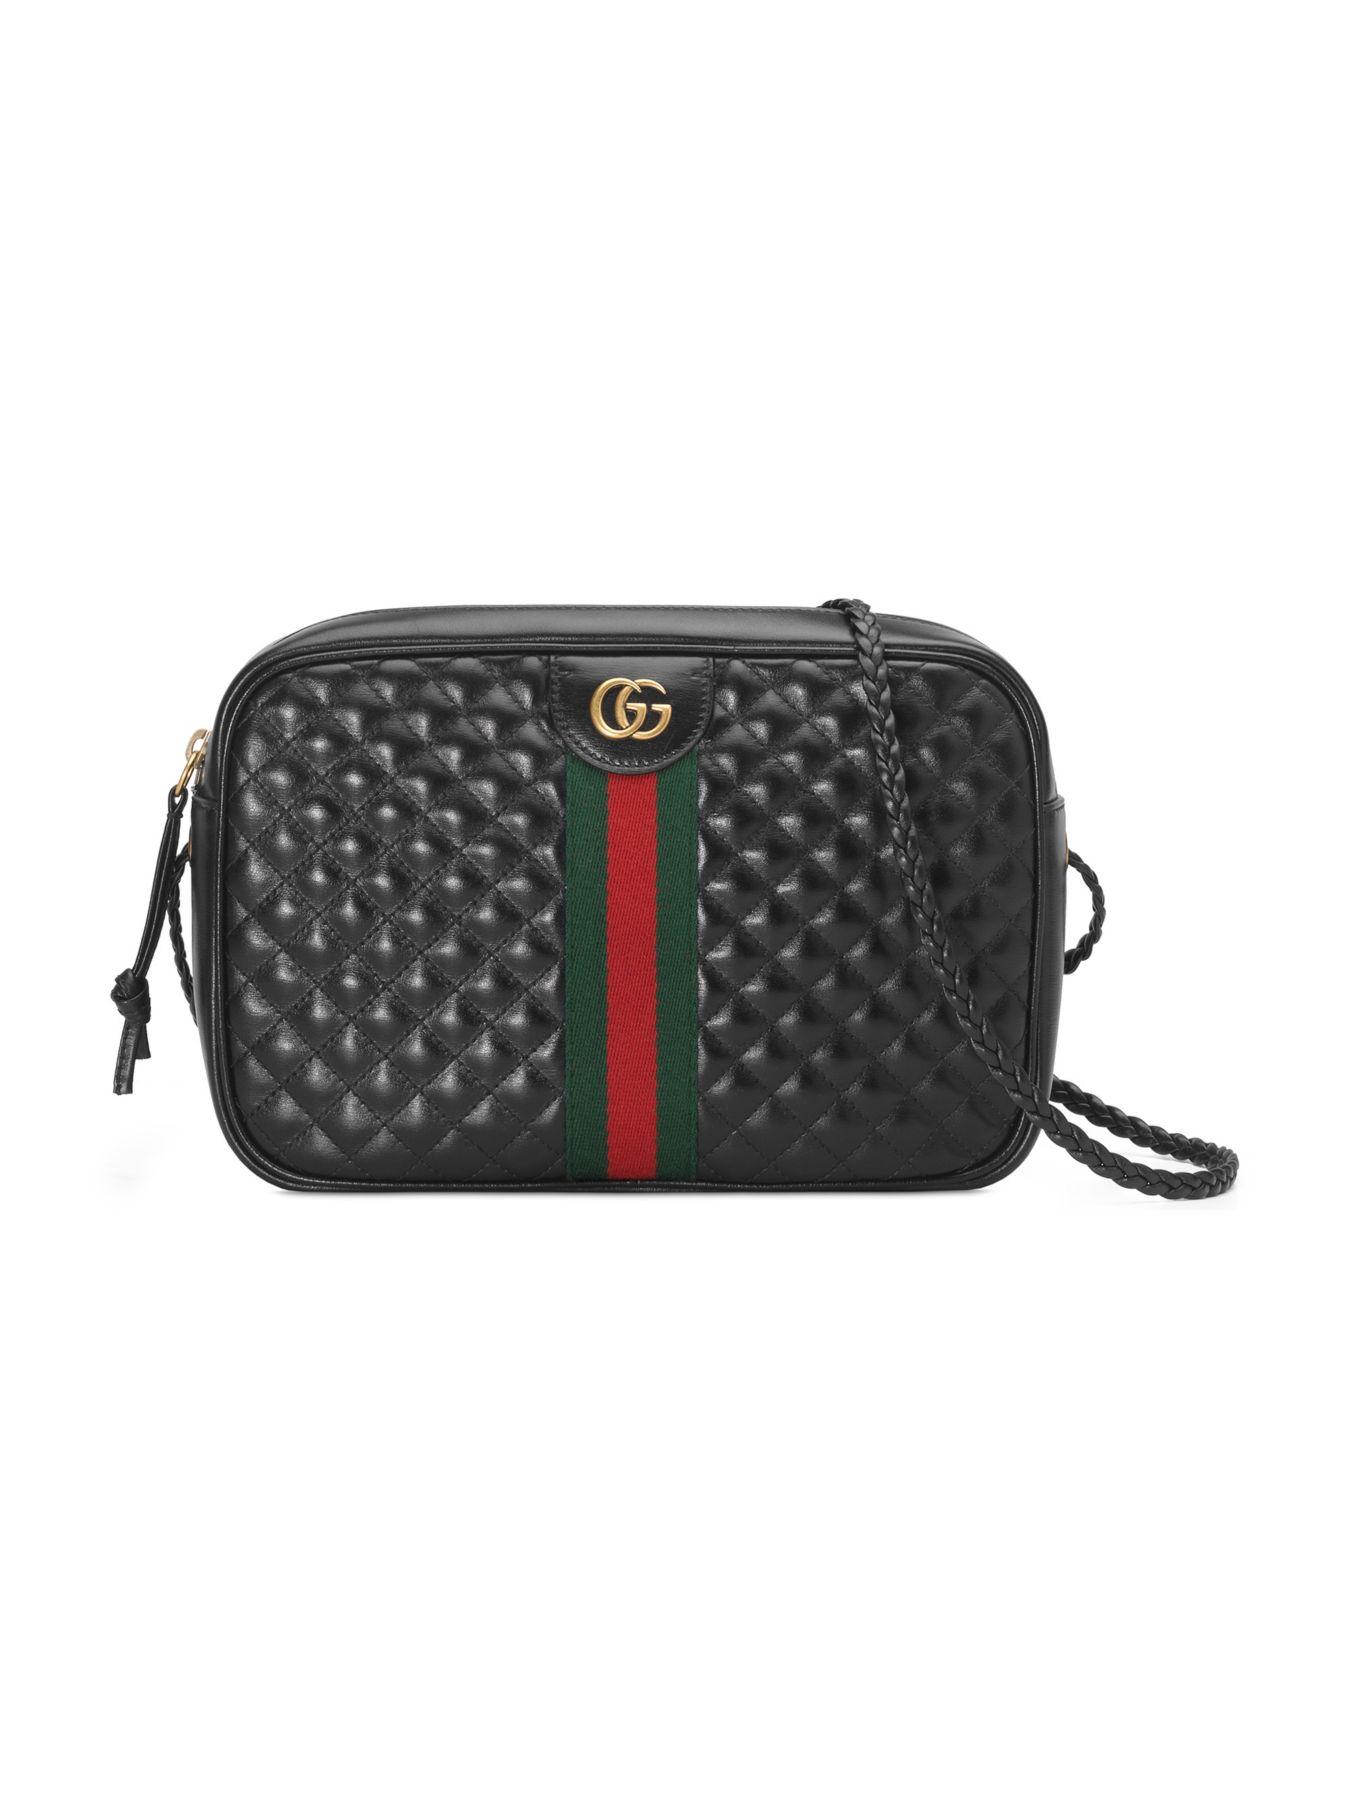 gucci quilted camera bag